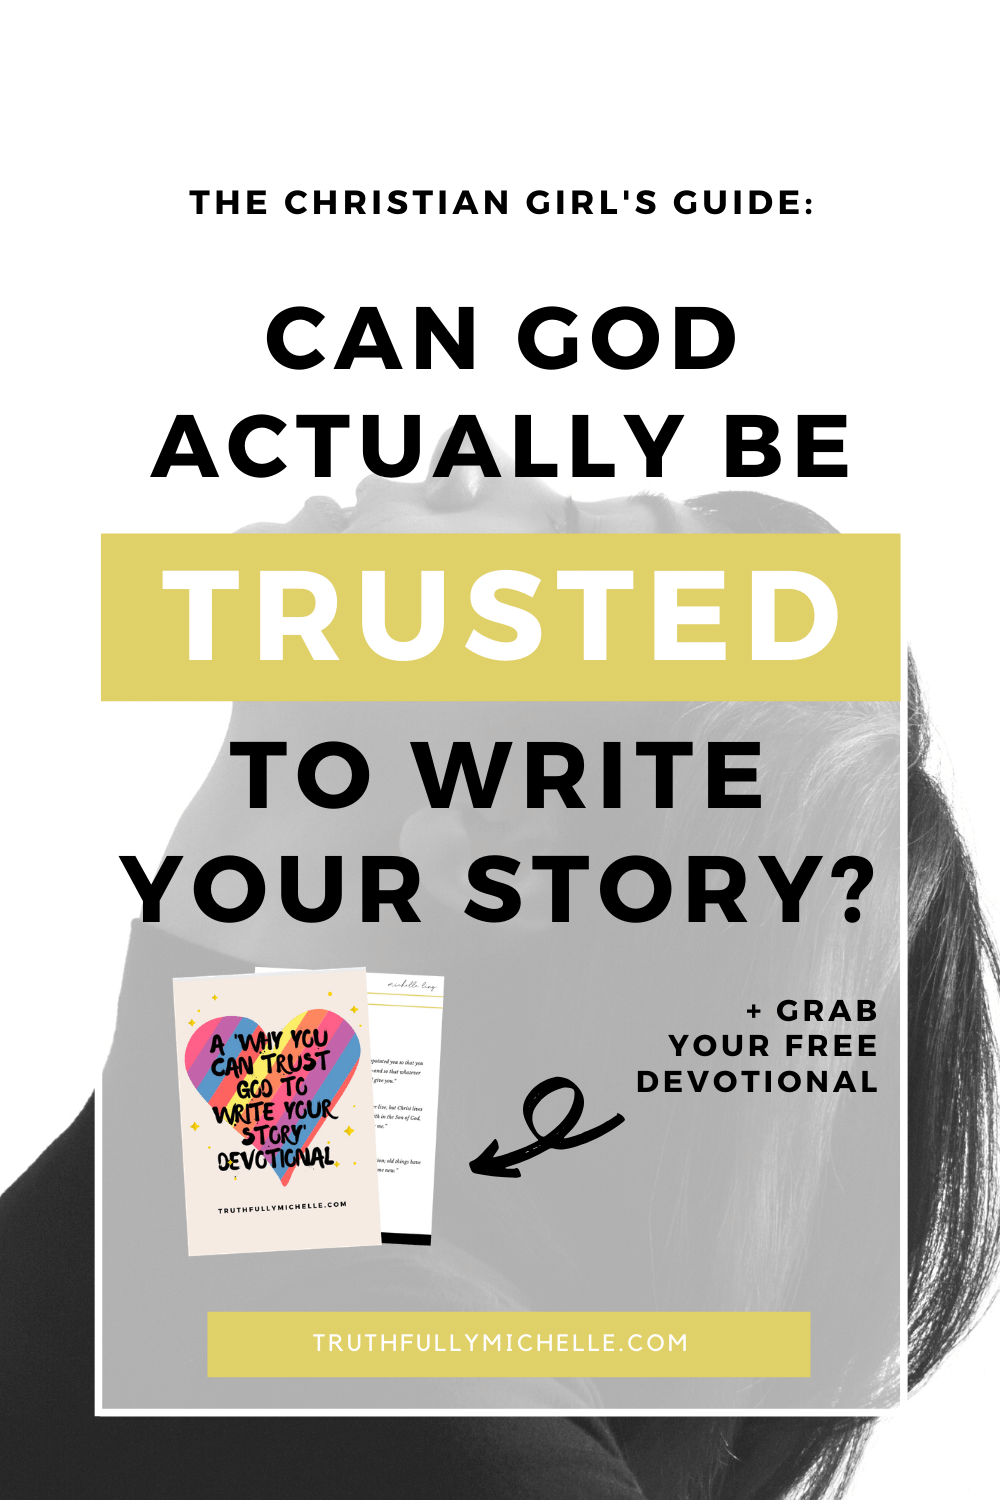 God is still writing your story, you can trust God to write your story, God's not done writing your story, God is writing your story, God writes your story, trust God to write your story